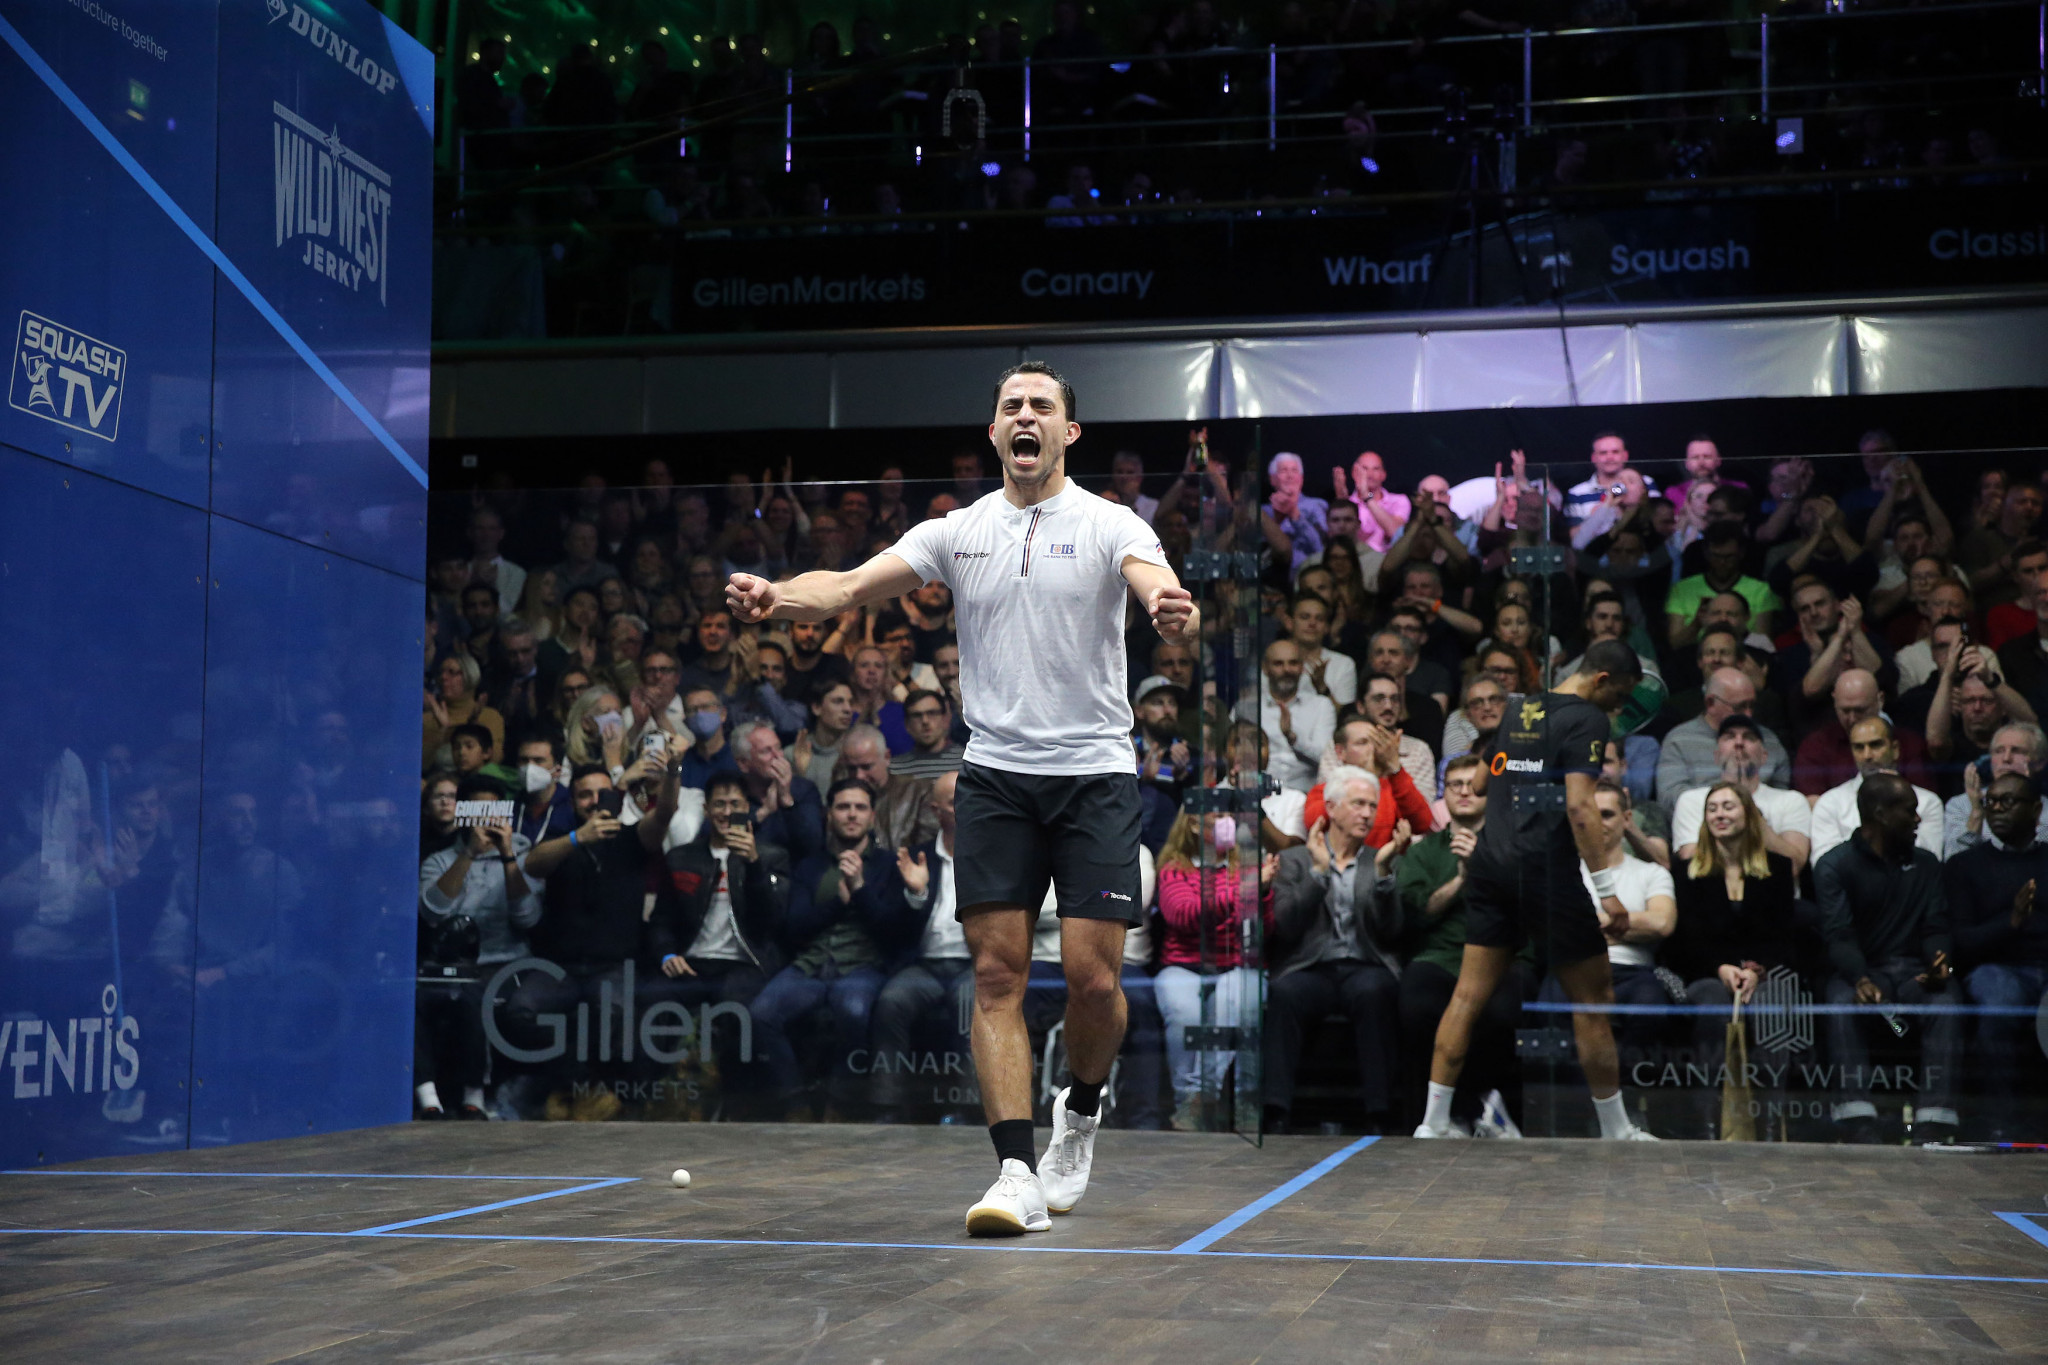 Egypt's Fares Dessouky won the Canary Wharf Classic for the first time ©PSA World Tour